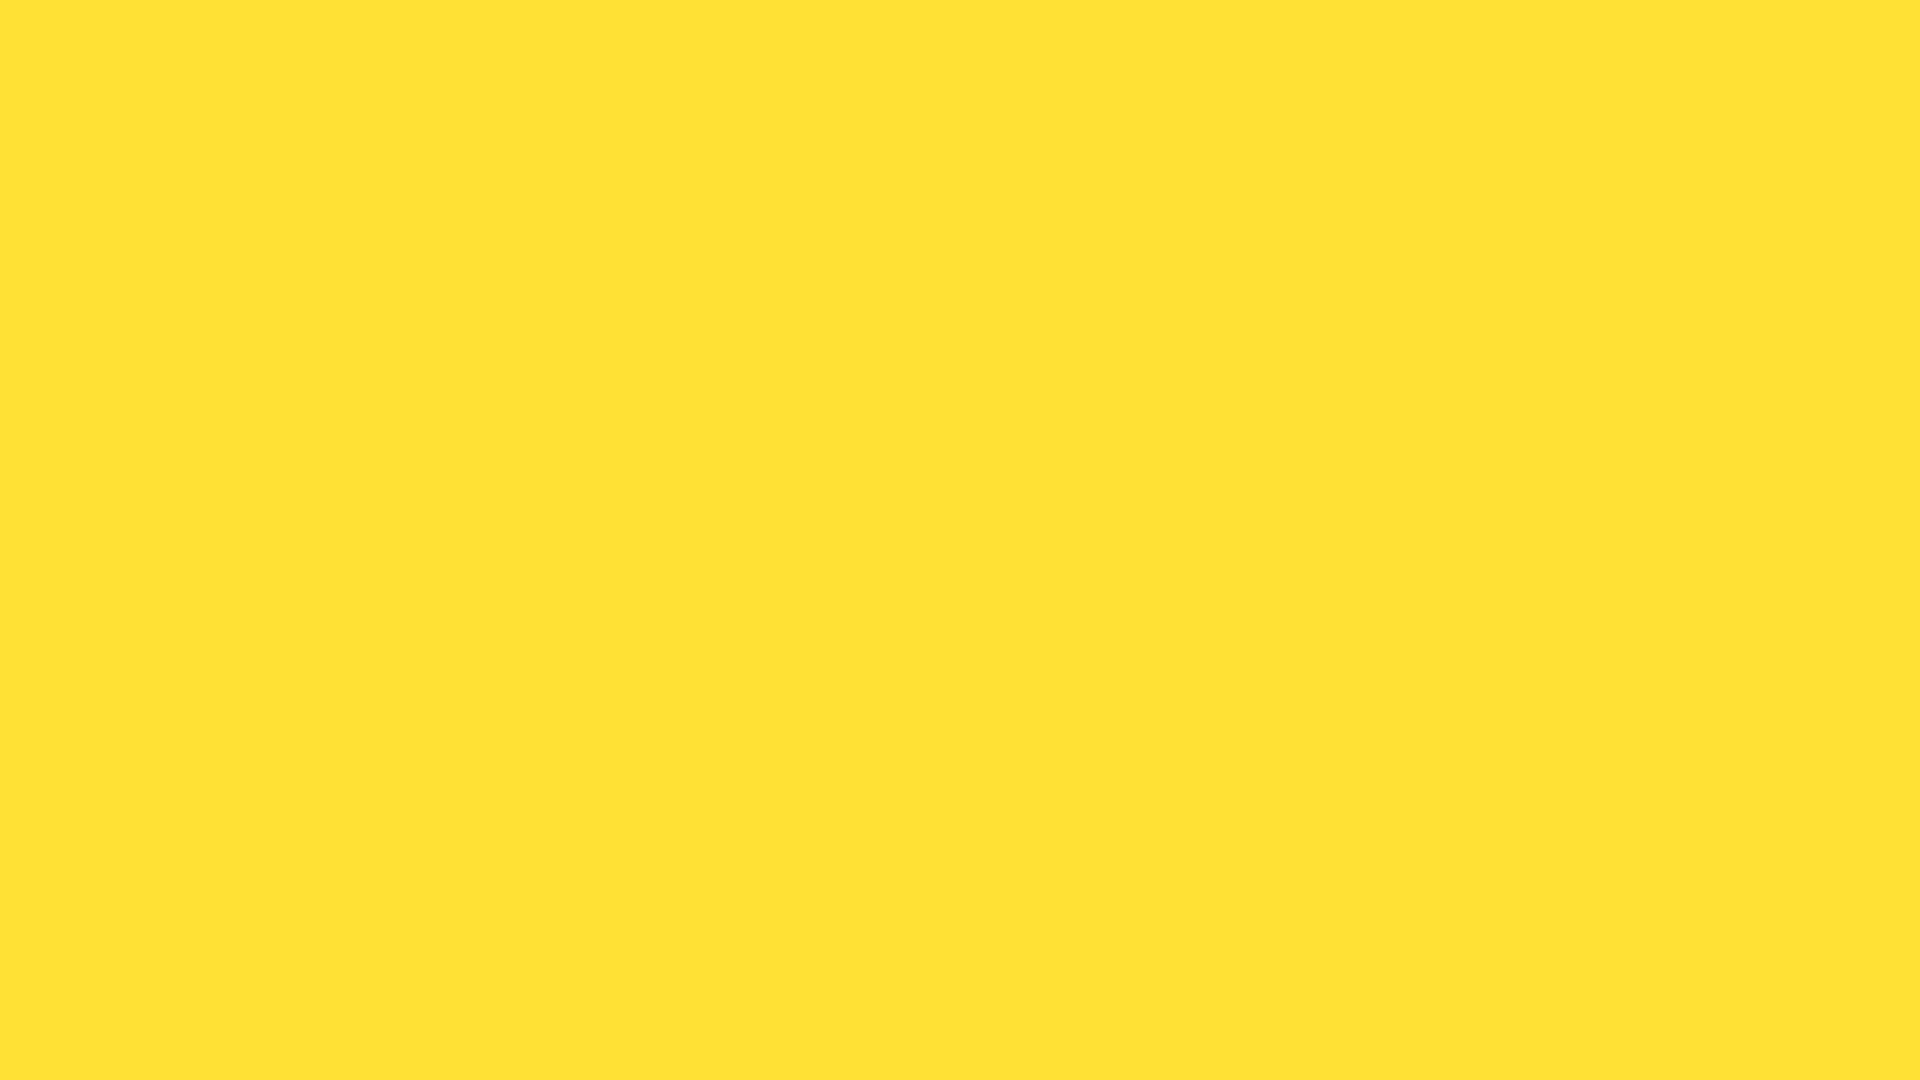 1920x1080 Banana Yellow Solid Color Background